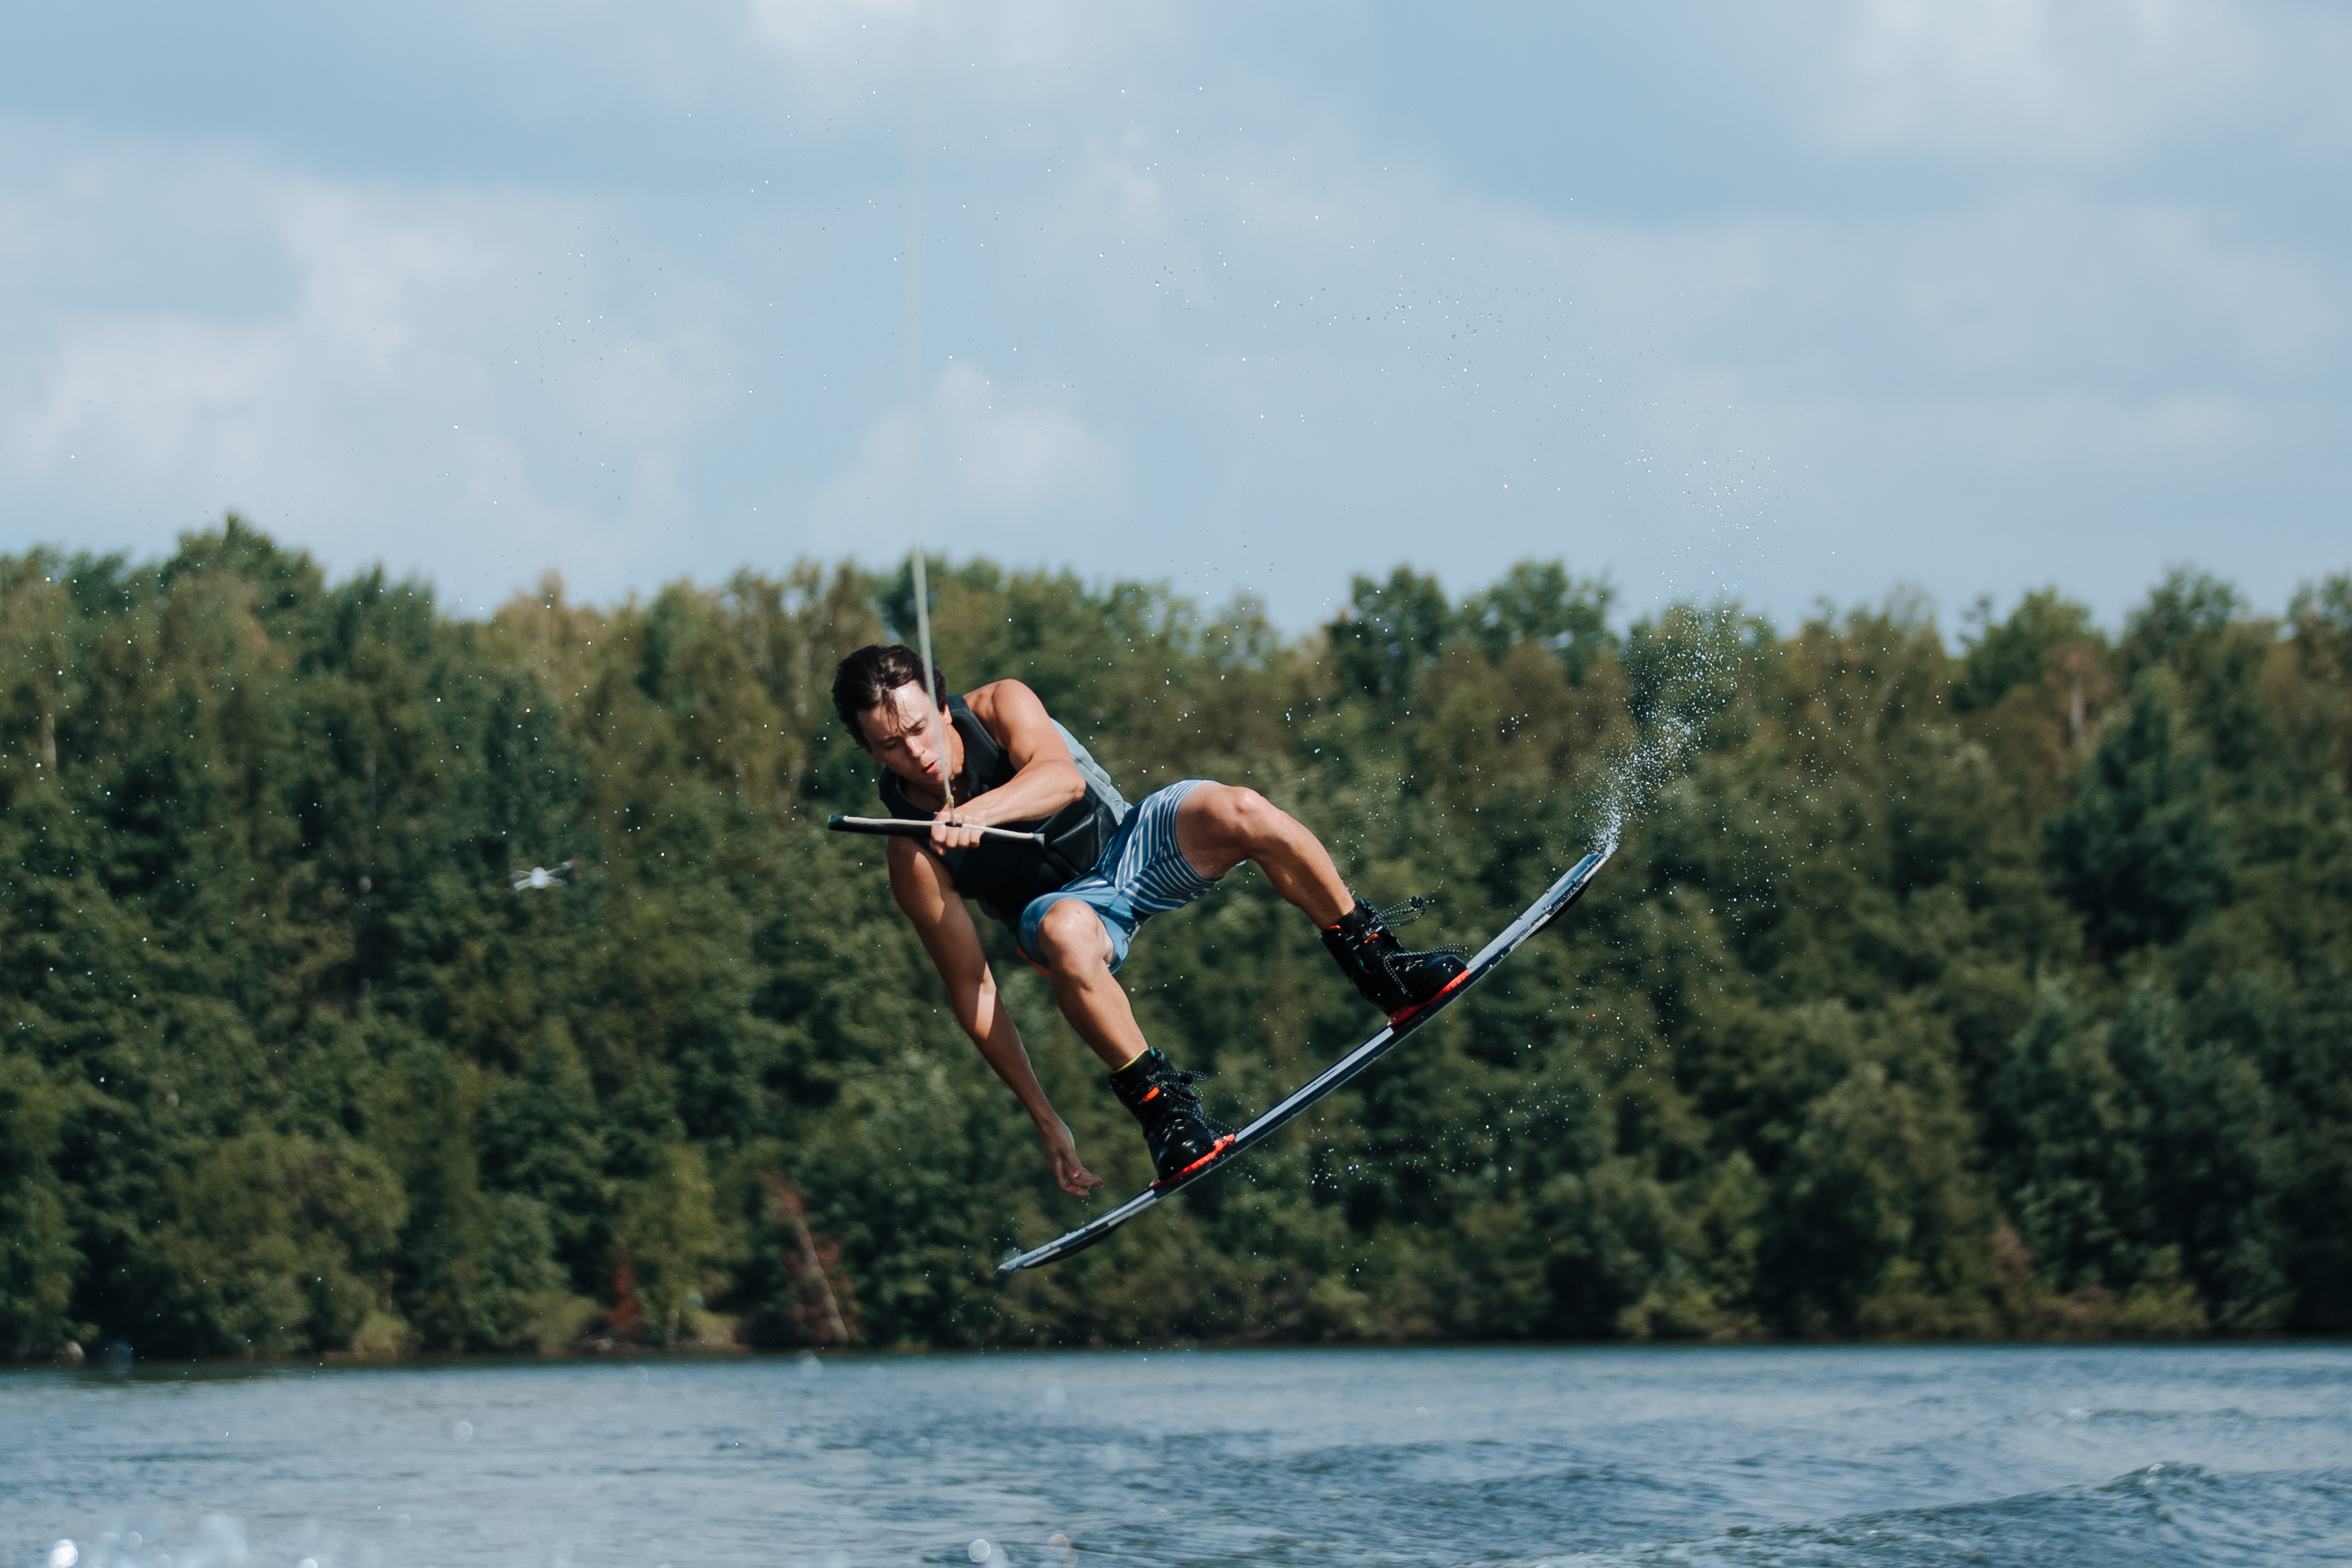 Man wakeboarding, Powerful wakeboarder, Dynamic action shot, Water sports enthusiast, 2950x1970 HD Desktop